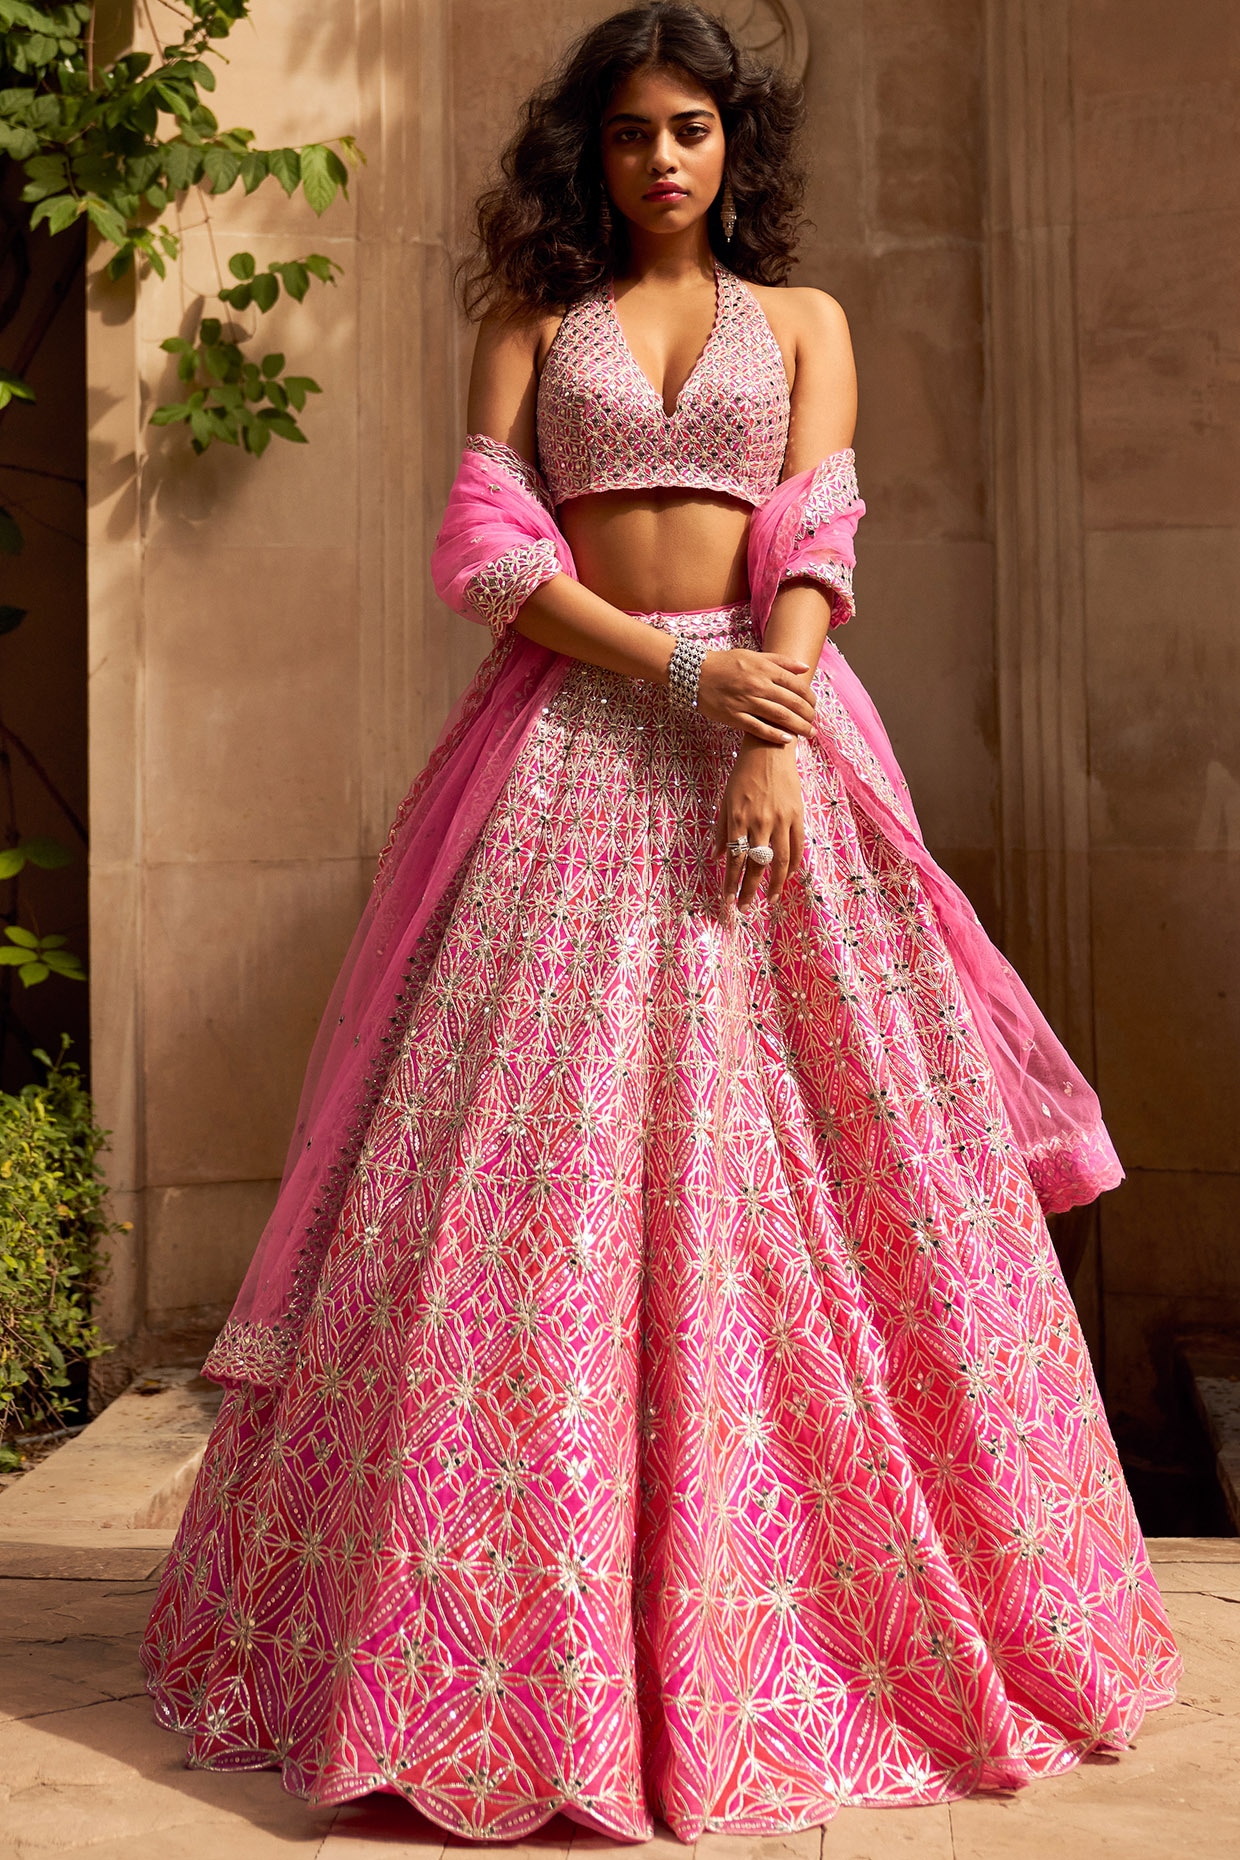 Couldn't decide if I liked this outfit from scratch by Sarah for Sangeet  function or not? How would you all rate it? : r/InstaCelebsGossip